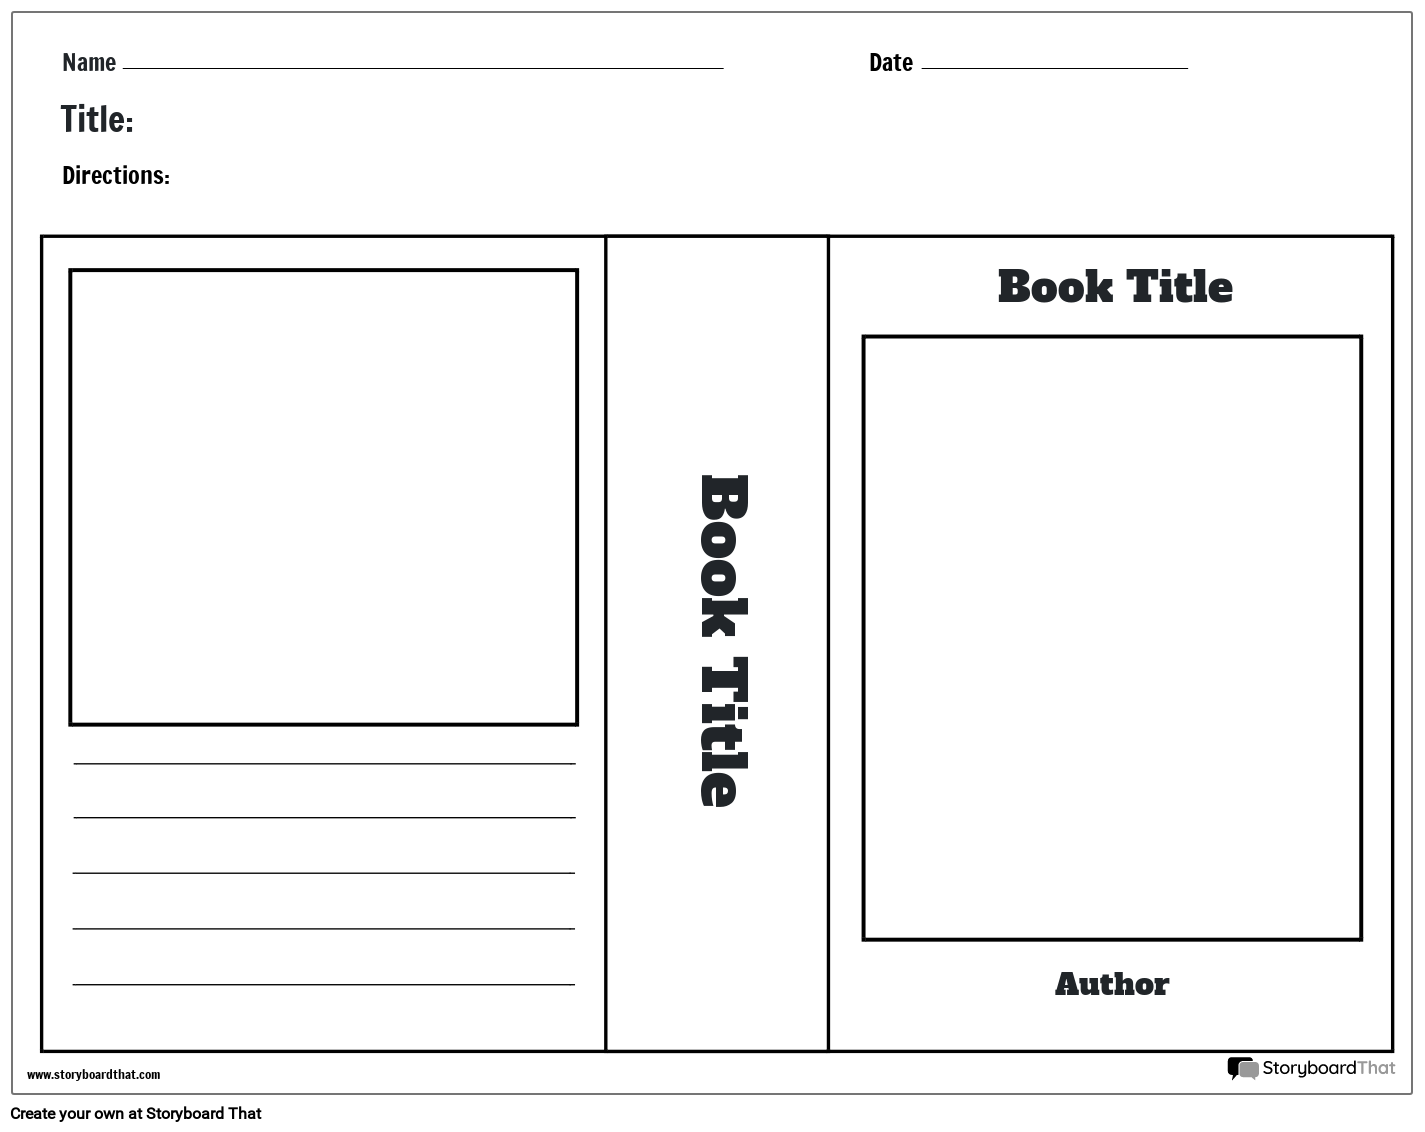 Free Custom Book Cover Templates: Print Book Jacket Covers